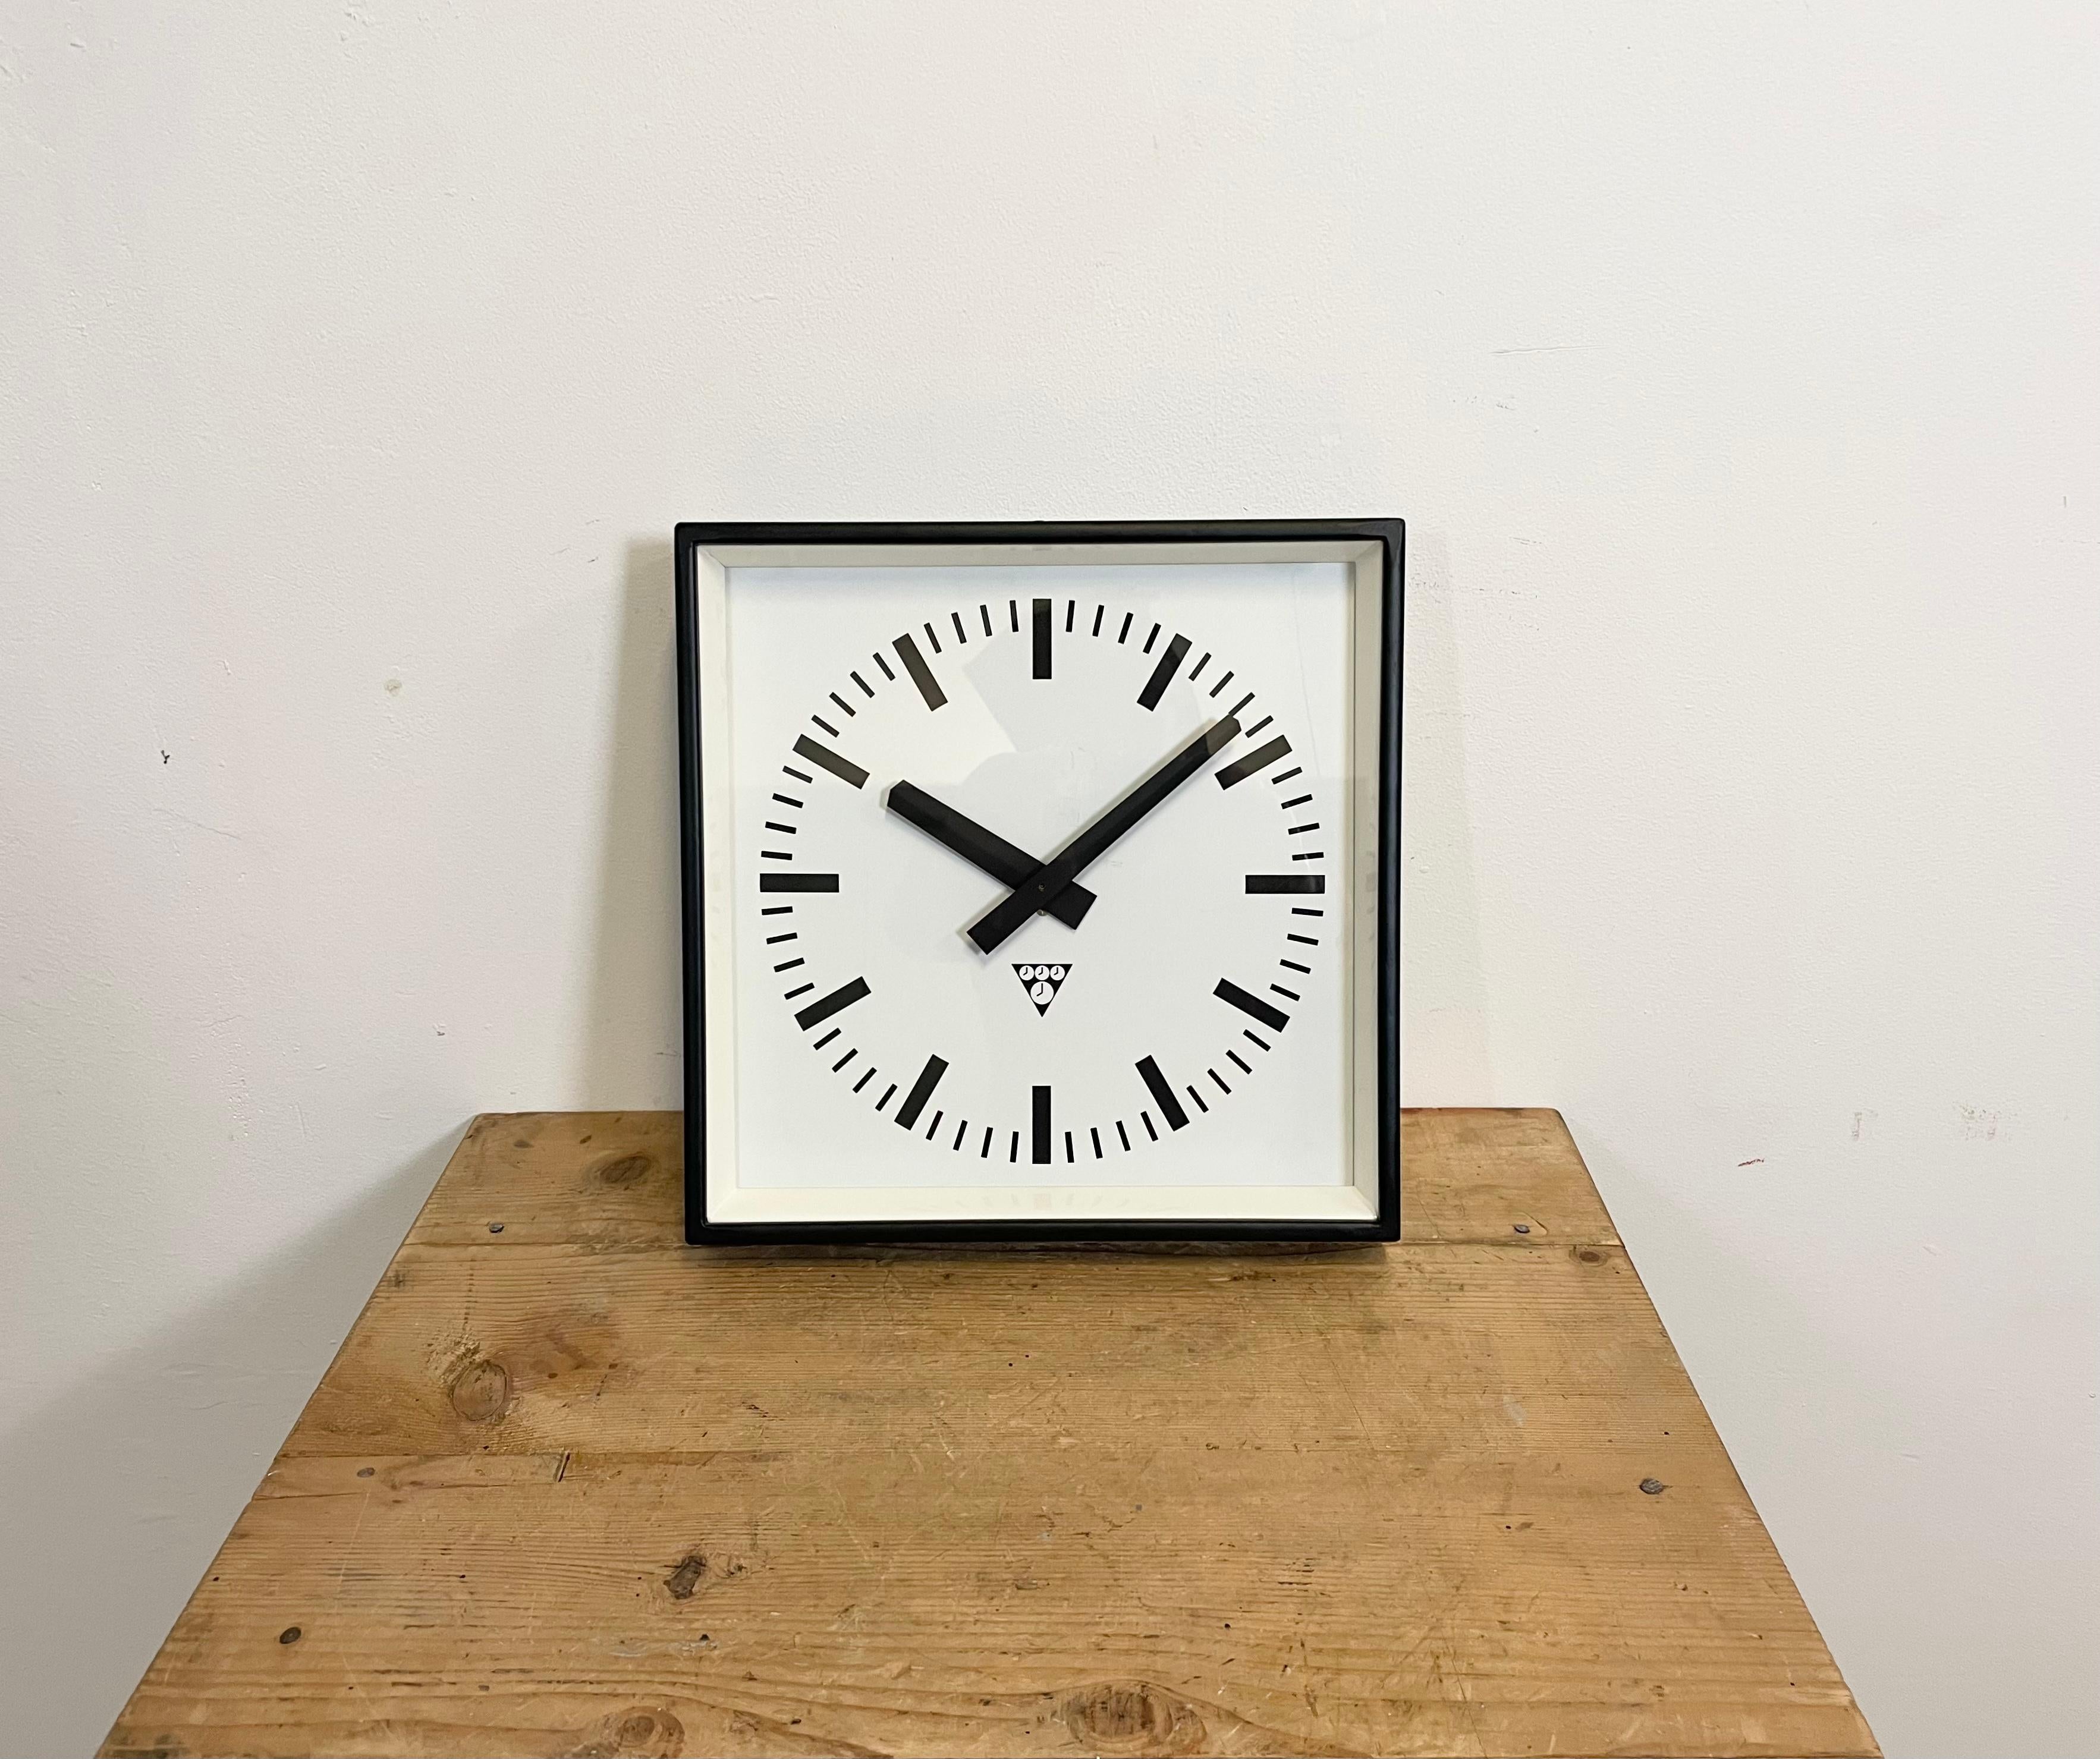 - Clock made by Pragotron in former Czechoslovakia during the 1970s 
- Was used in factories, schools and railway stations 
- Black metal body 
- Aluminium dial and hands 
- Clear glass cover 
- This item has been converted into a